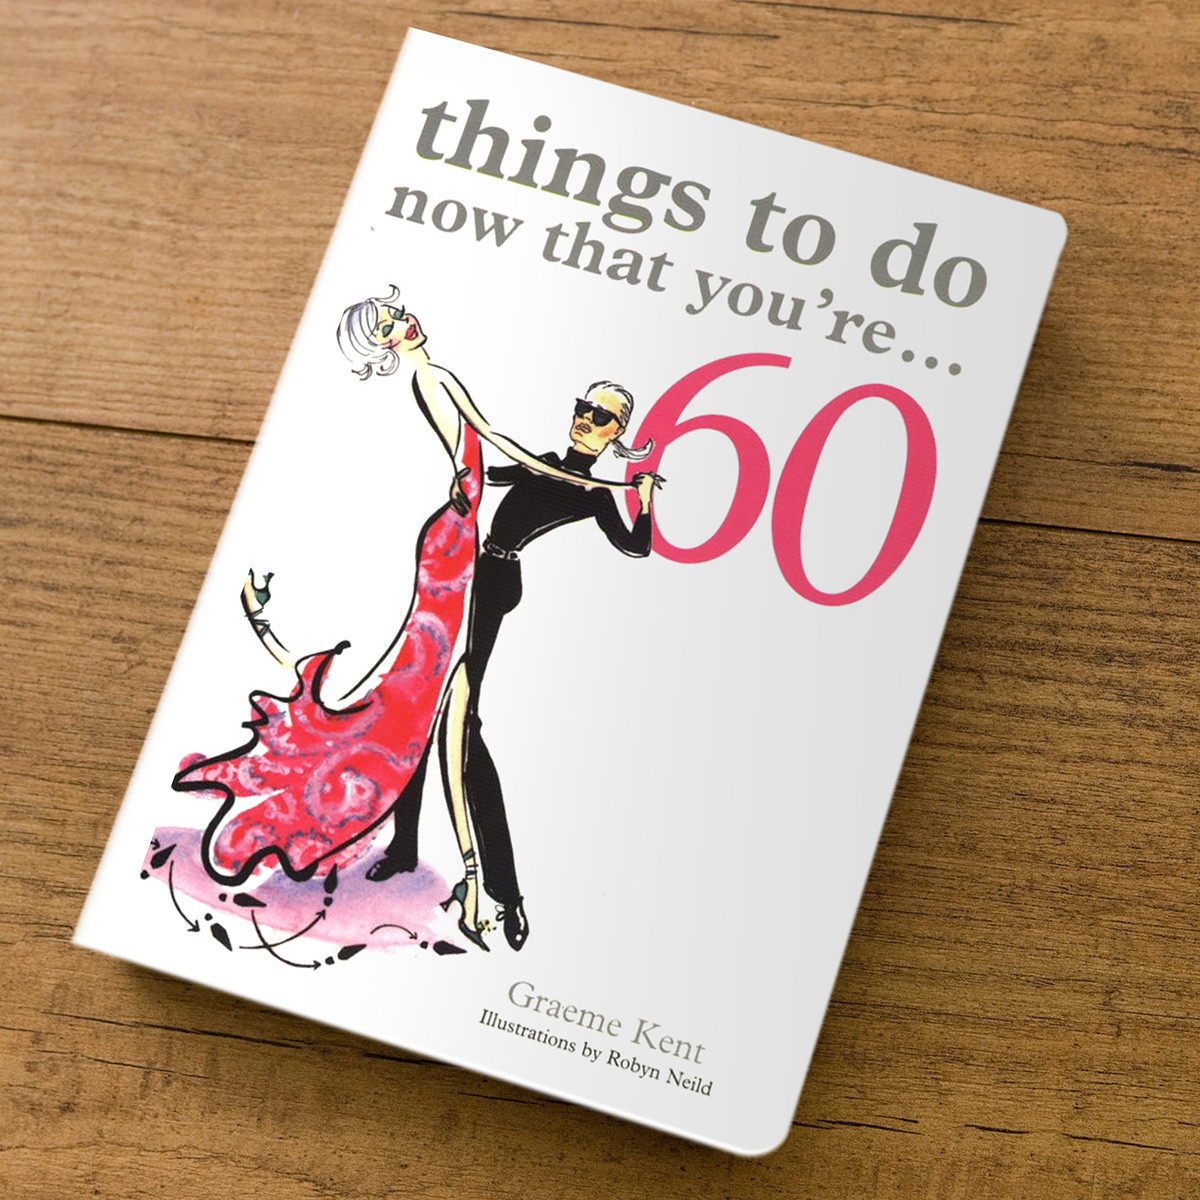 Gifts For 60th Birthday Man
 Things To Do Now That You re 60 Gift Book 60th